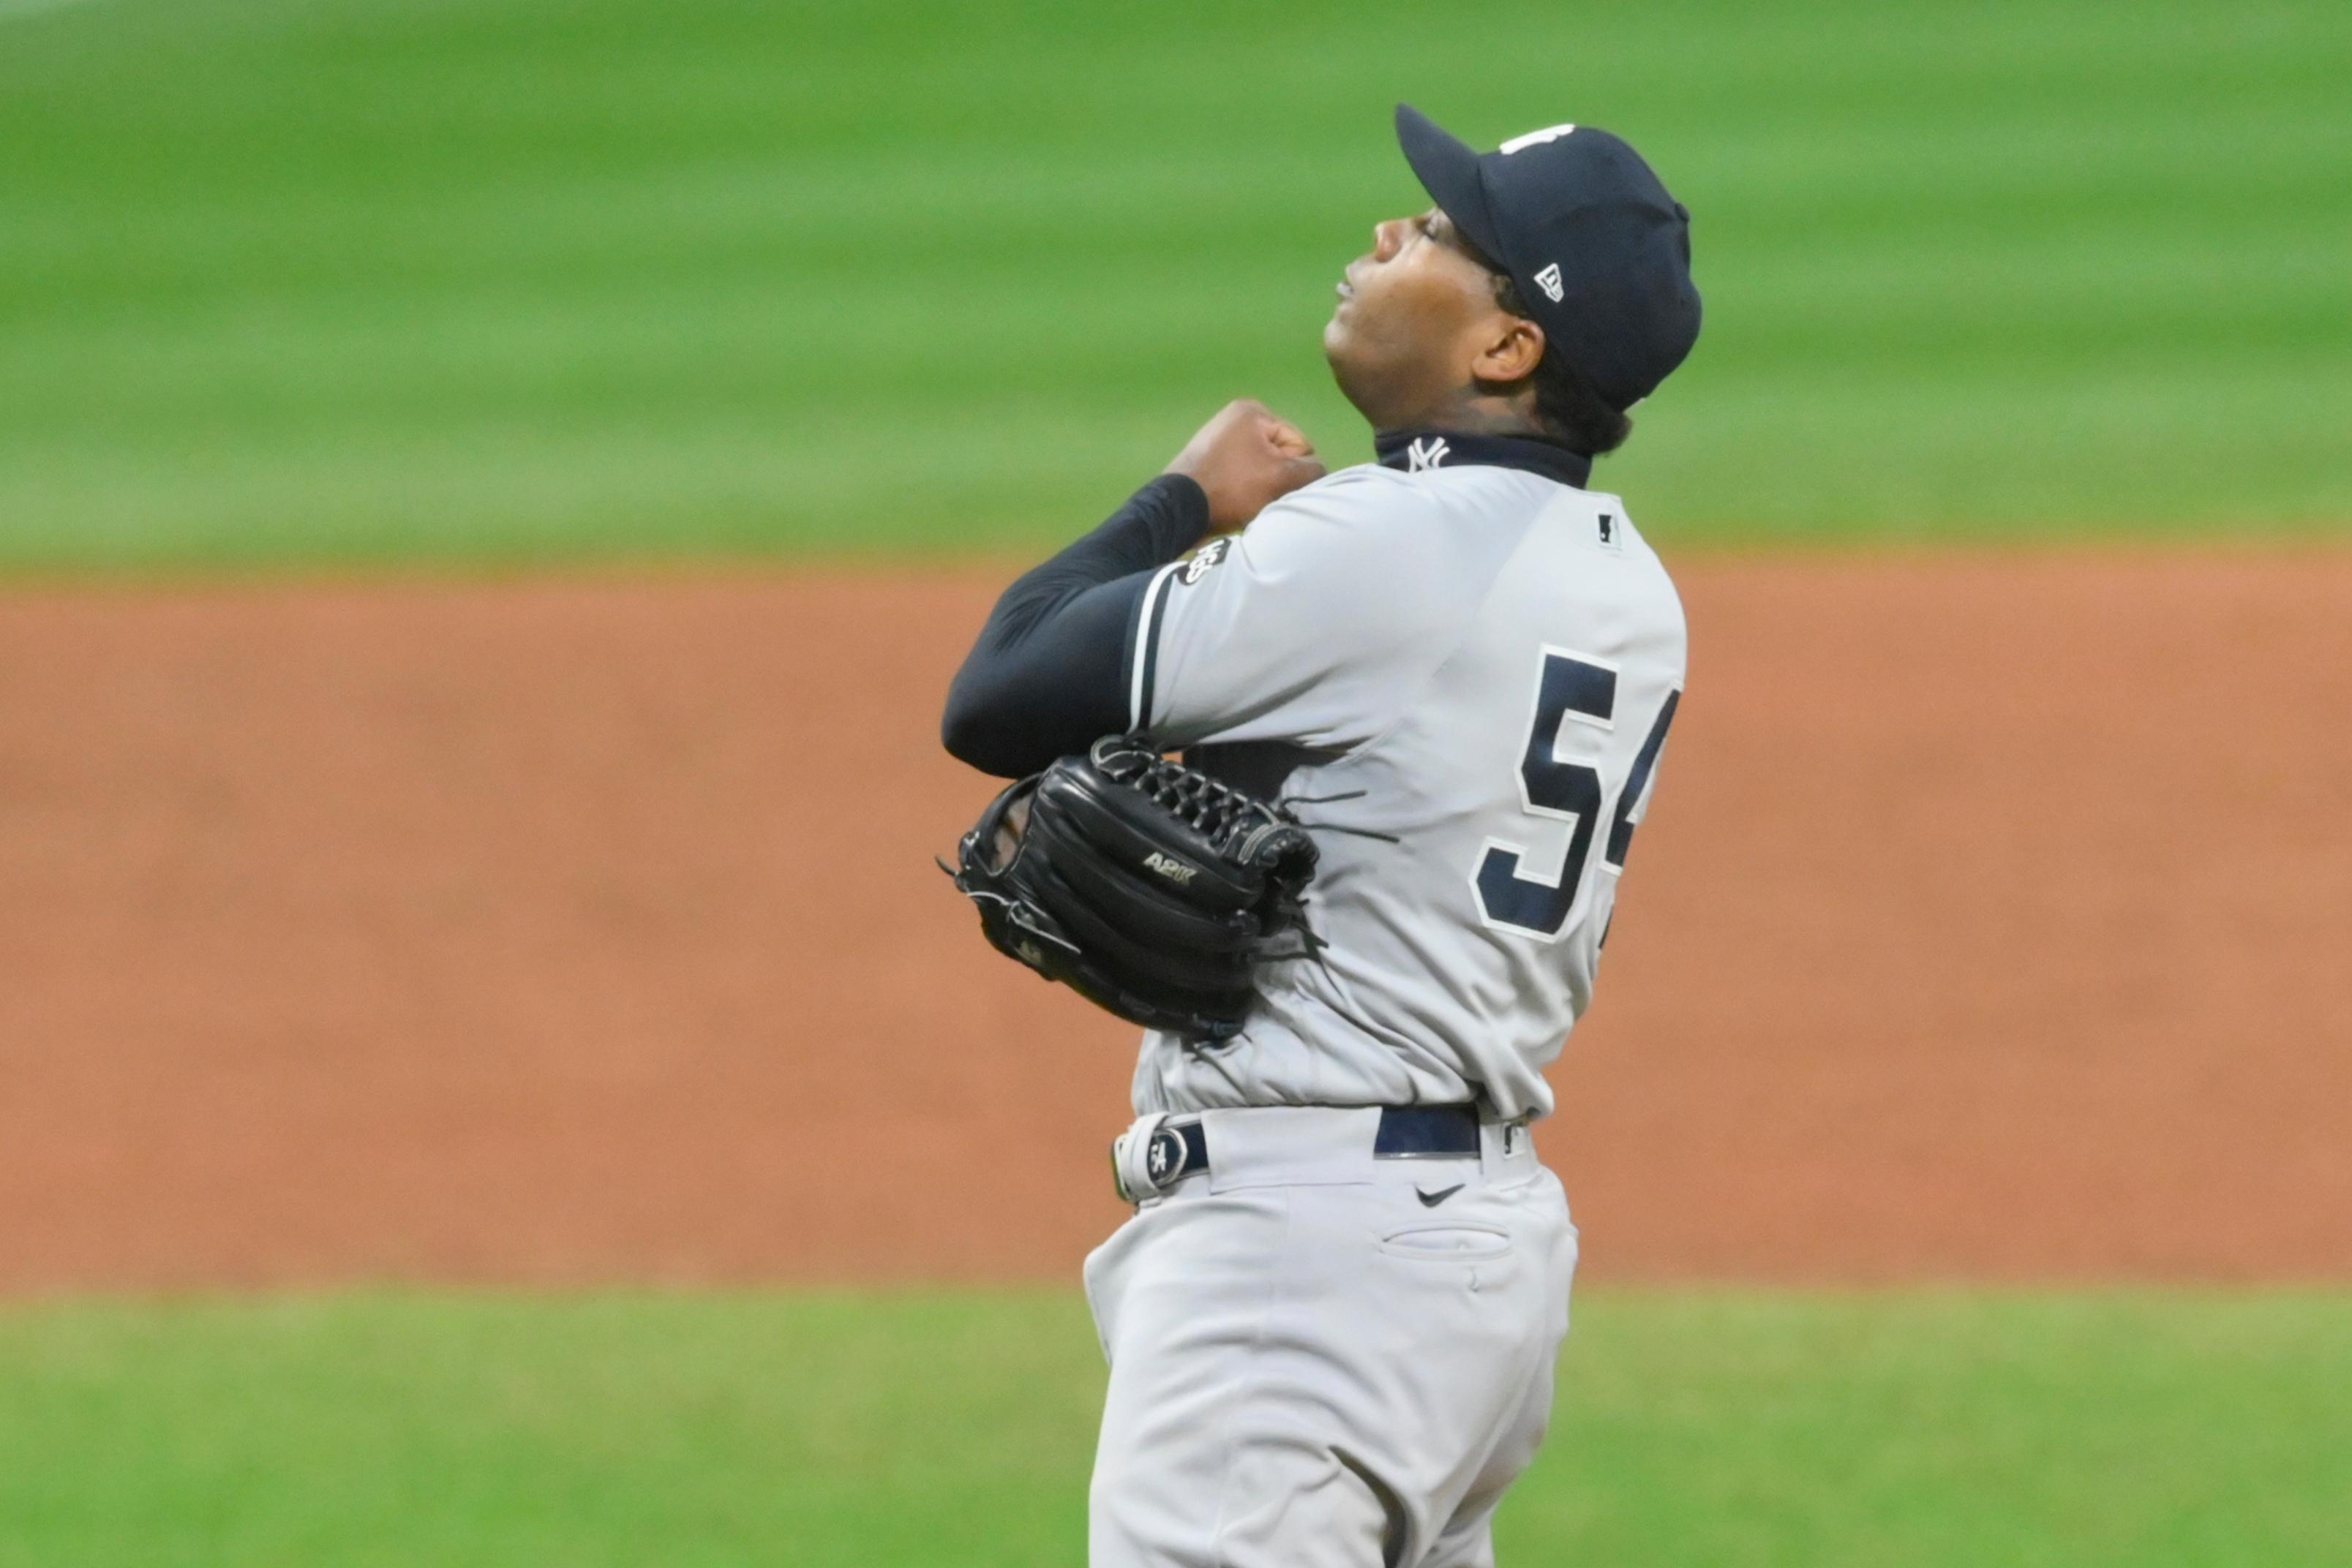 Sep 30, 2020; Cleveland, Ohio, USA; New York Yankees relief pitcher Aroldis Chapman (54) celebrates the final out in a win over the Cleveland Indians at Progressive Field. Mandatory Credit: David Richard-USA TODAY Sports / © David Richard-USA TODAY Sports